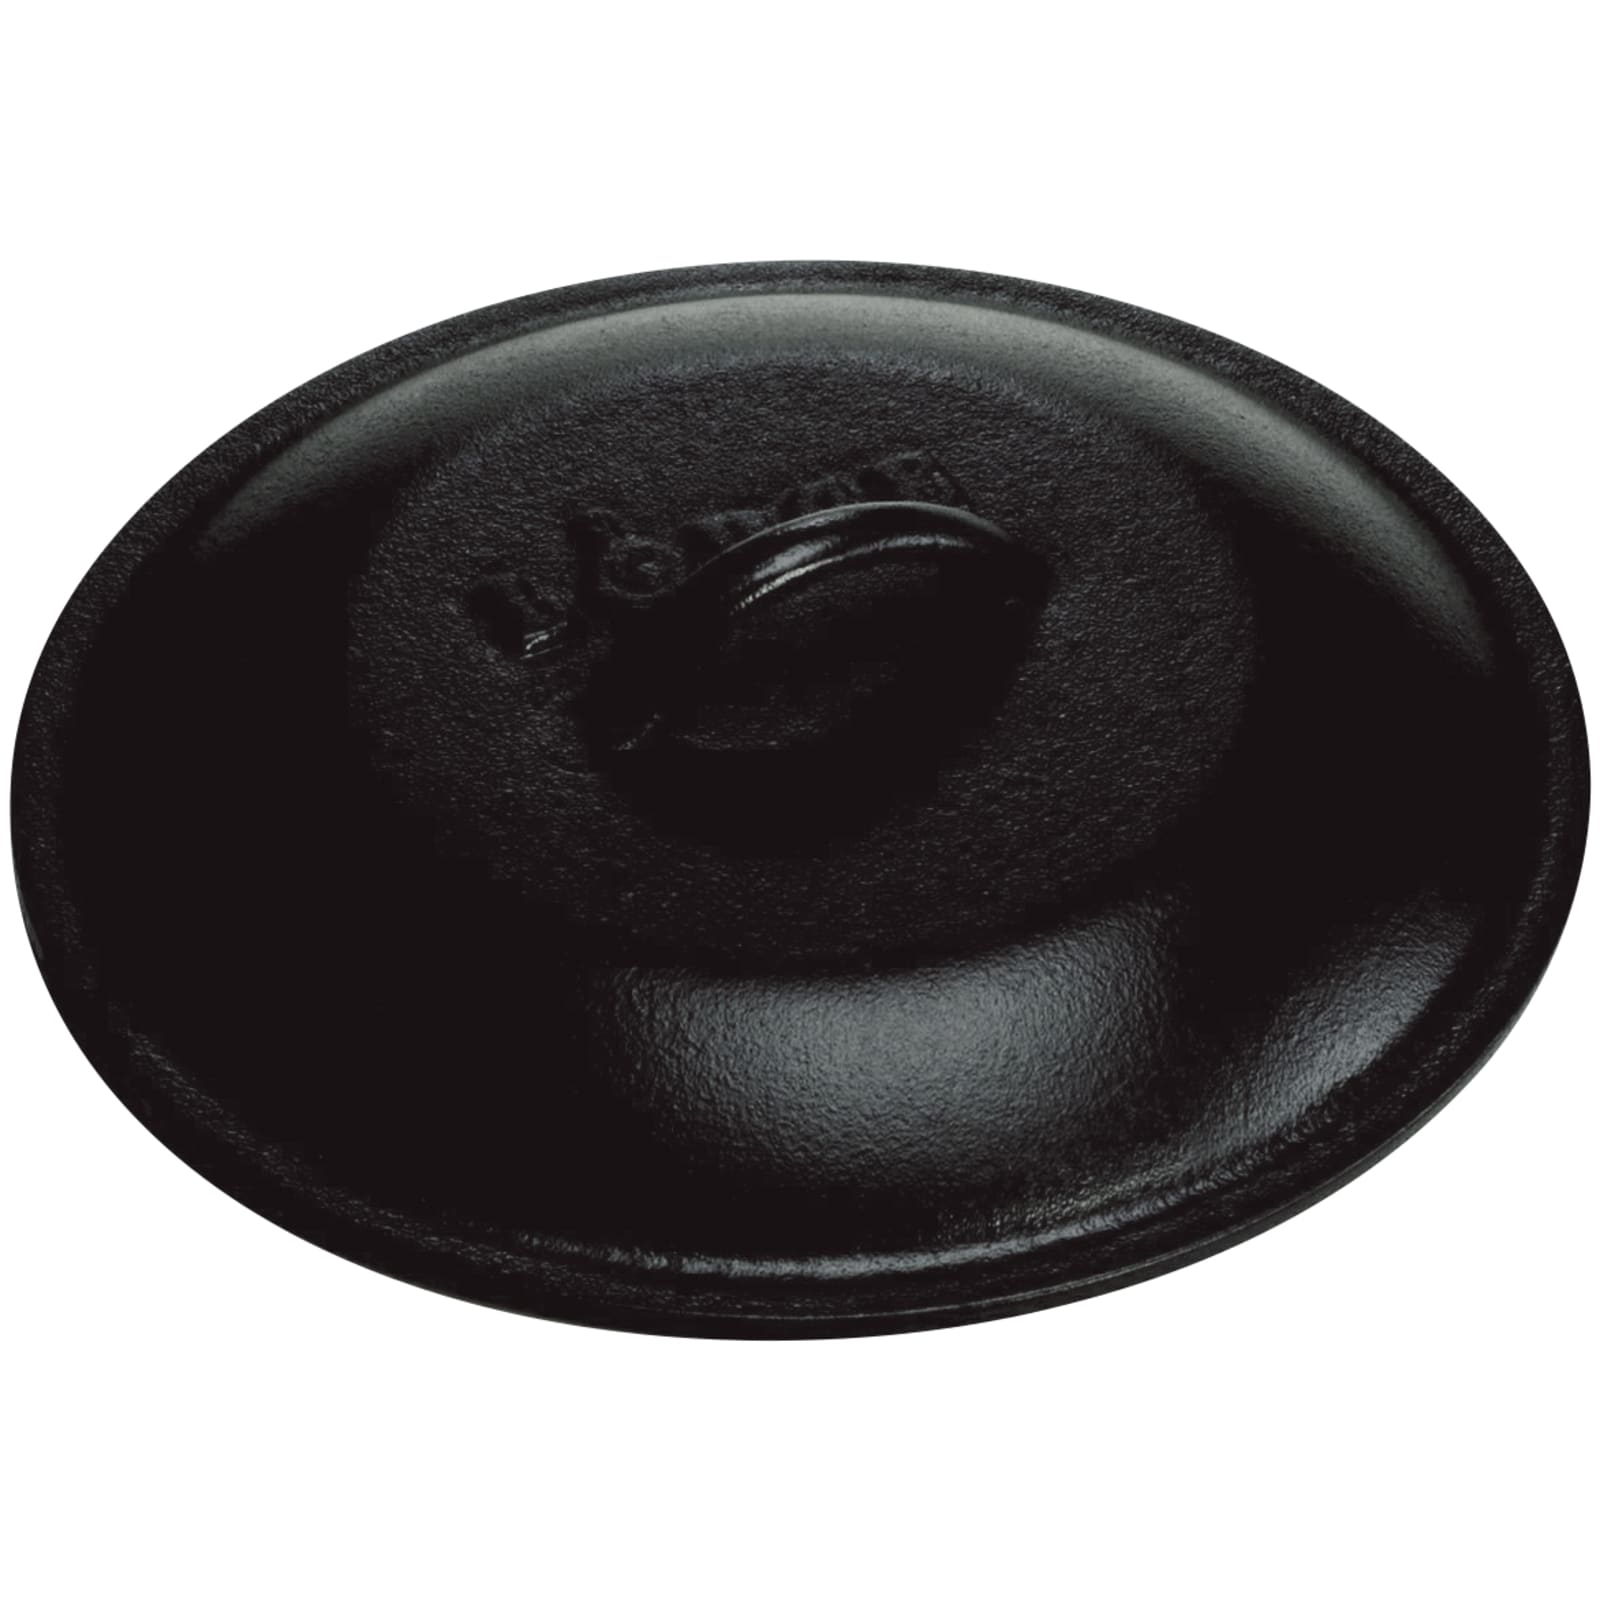 12 In. Iron Cover by Lodge at Fleet Farm